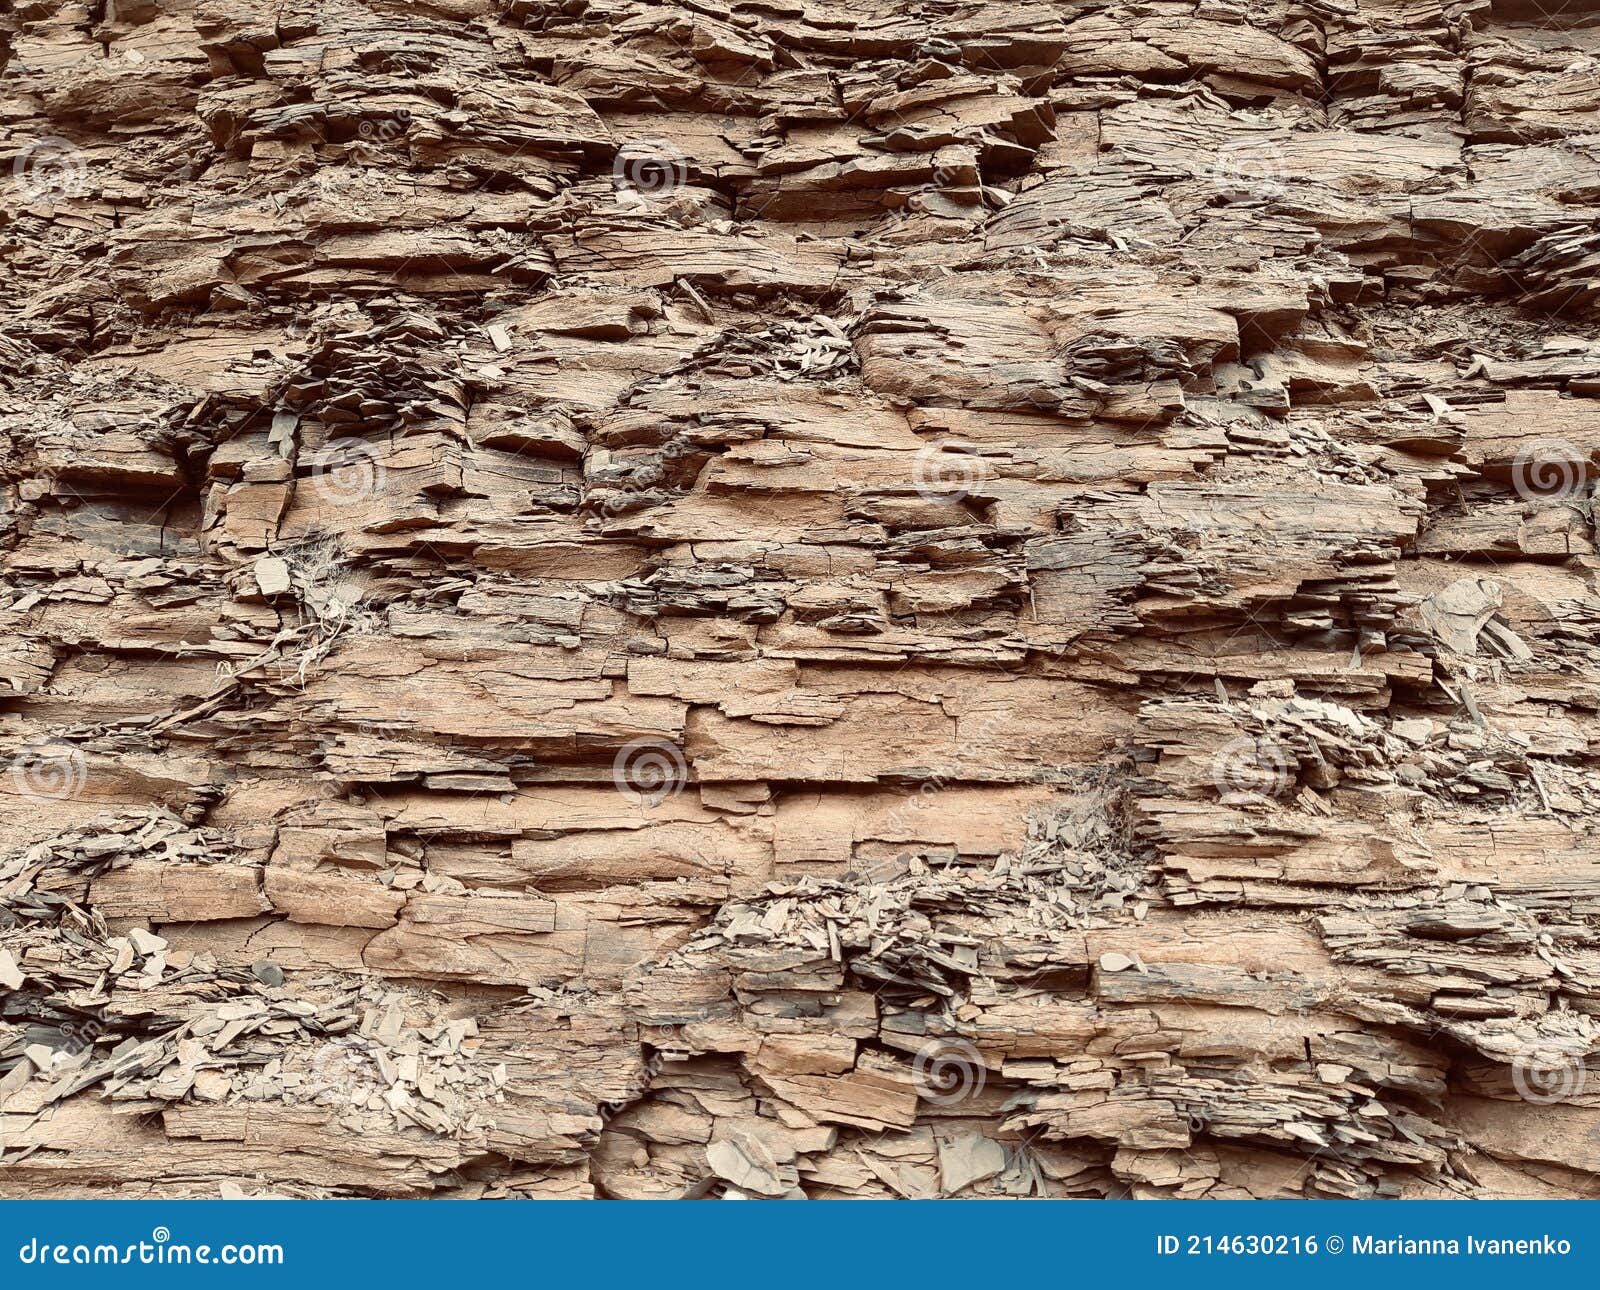 Natural Stone Texture of the Sedimentary Rock. Stone Wall Layers of  Geological Photo Texture Stock Photo - Image of geologic, wall: 214630216